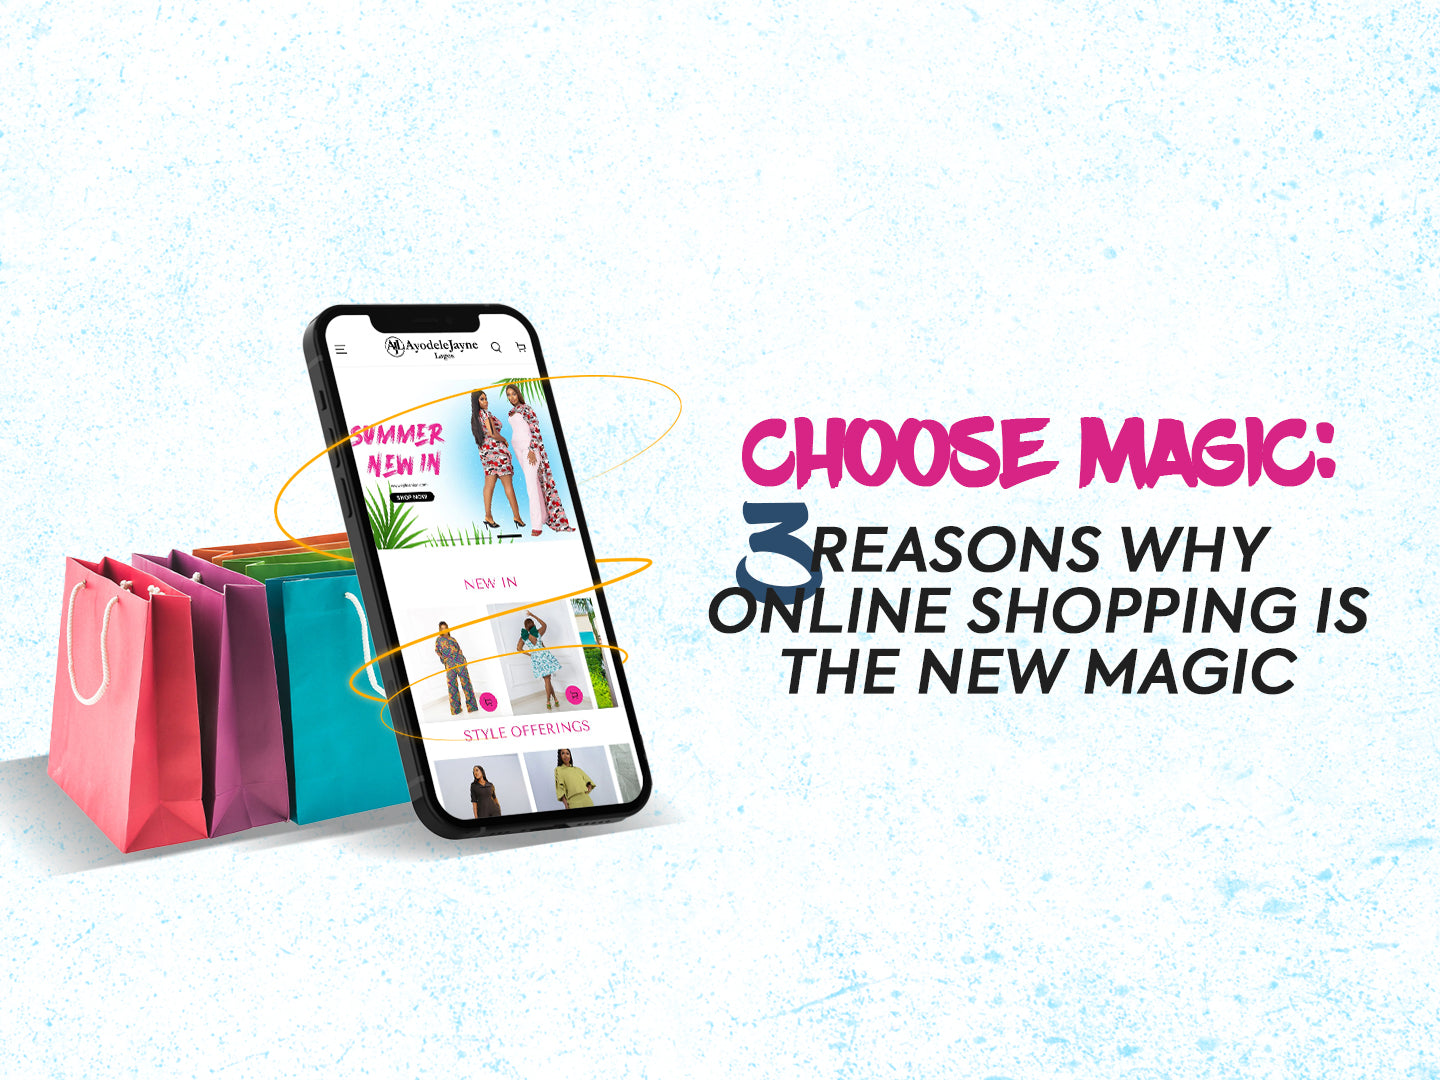 Choose Magic: 3 Reasons Why Online Shopping Is The New Magic